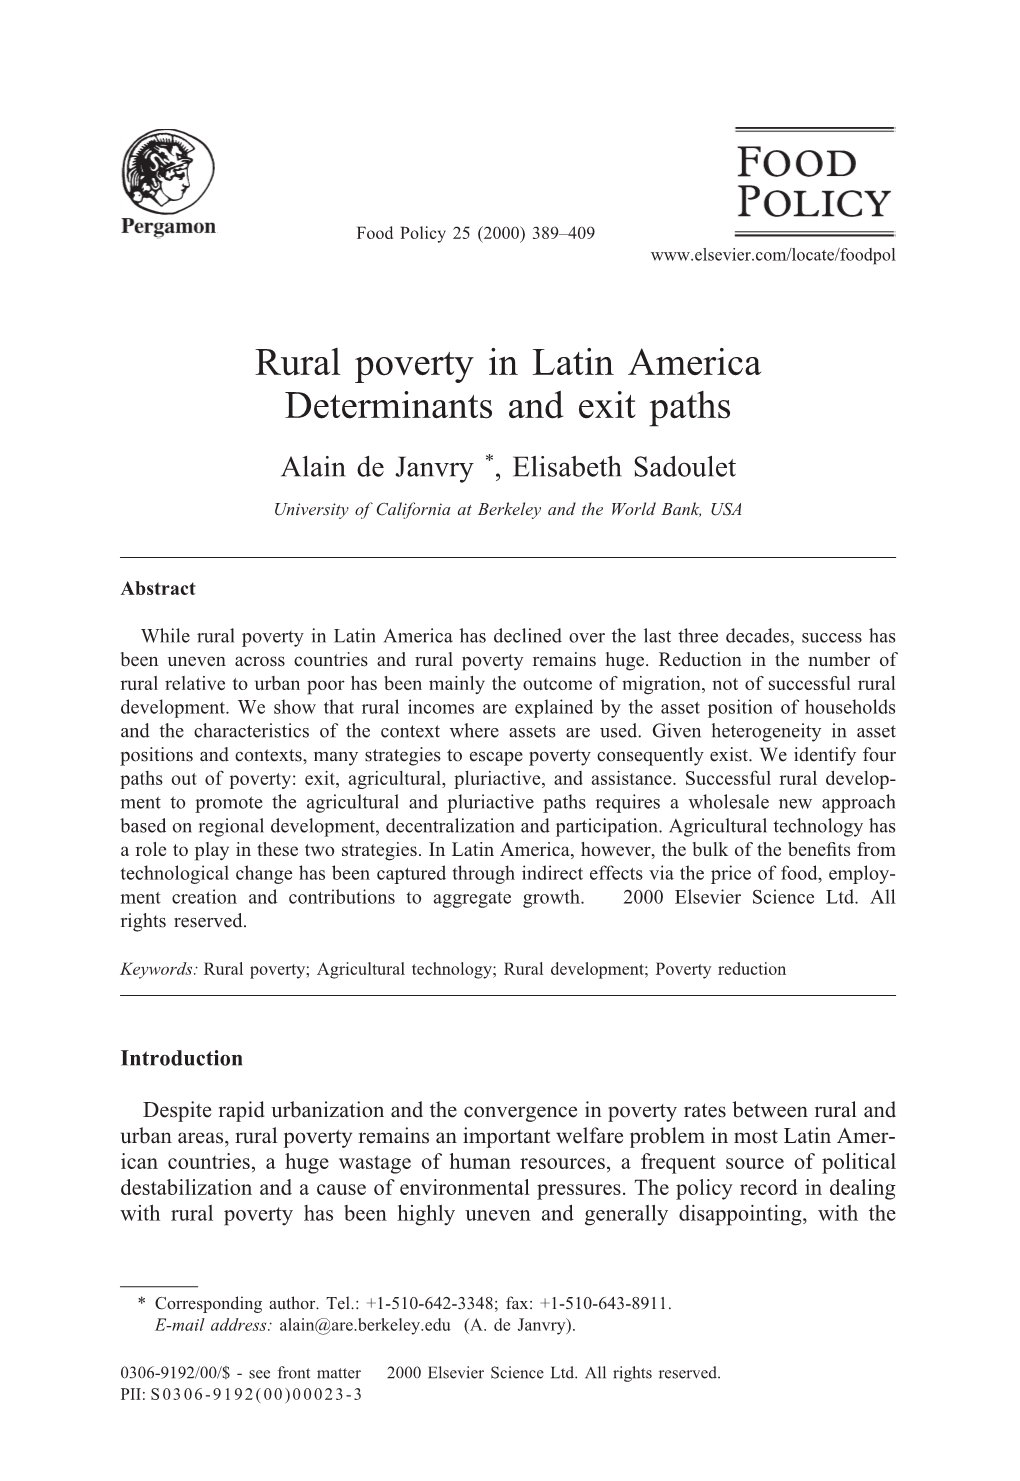 Rural Poverty in Latin America Determinants and Exit Paths Alain De Janvry *, Elisabeth Sadoulet University of California at Berkeley and the World Bank, USA